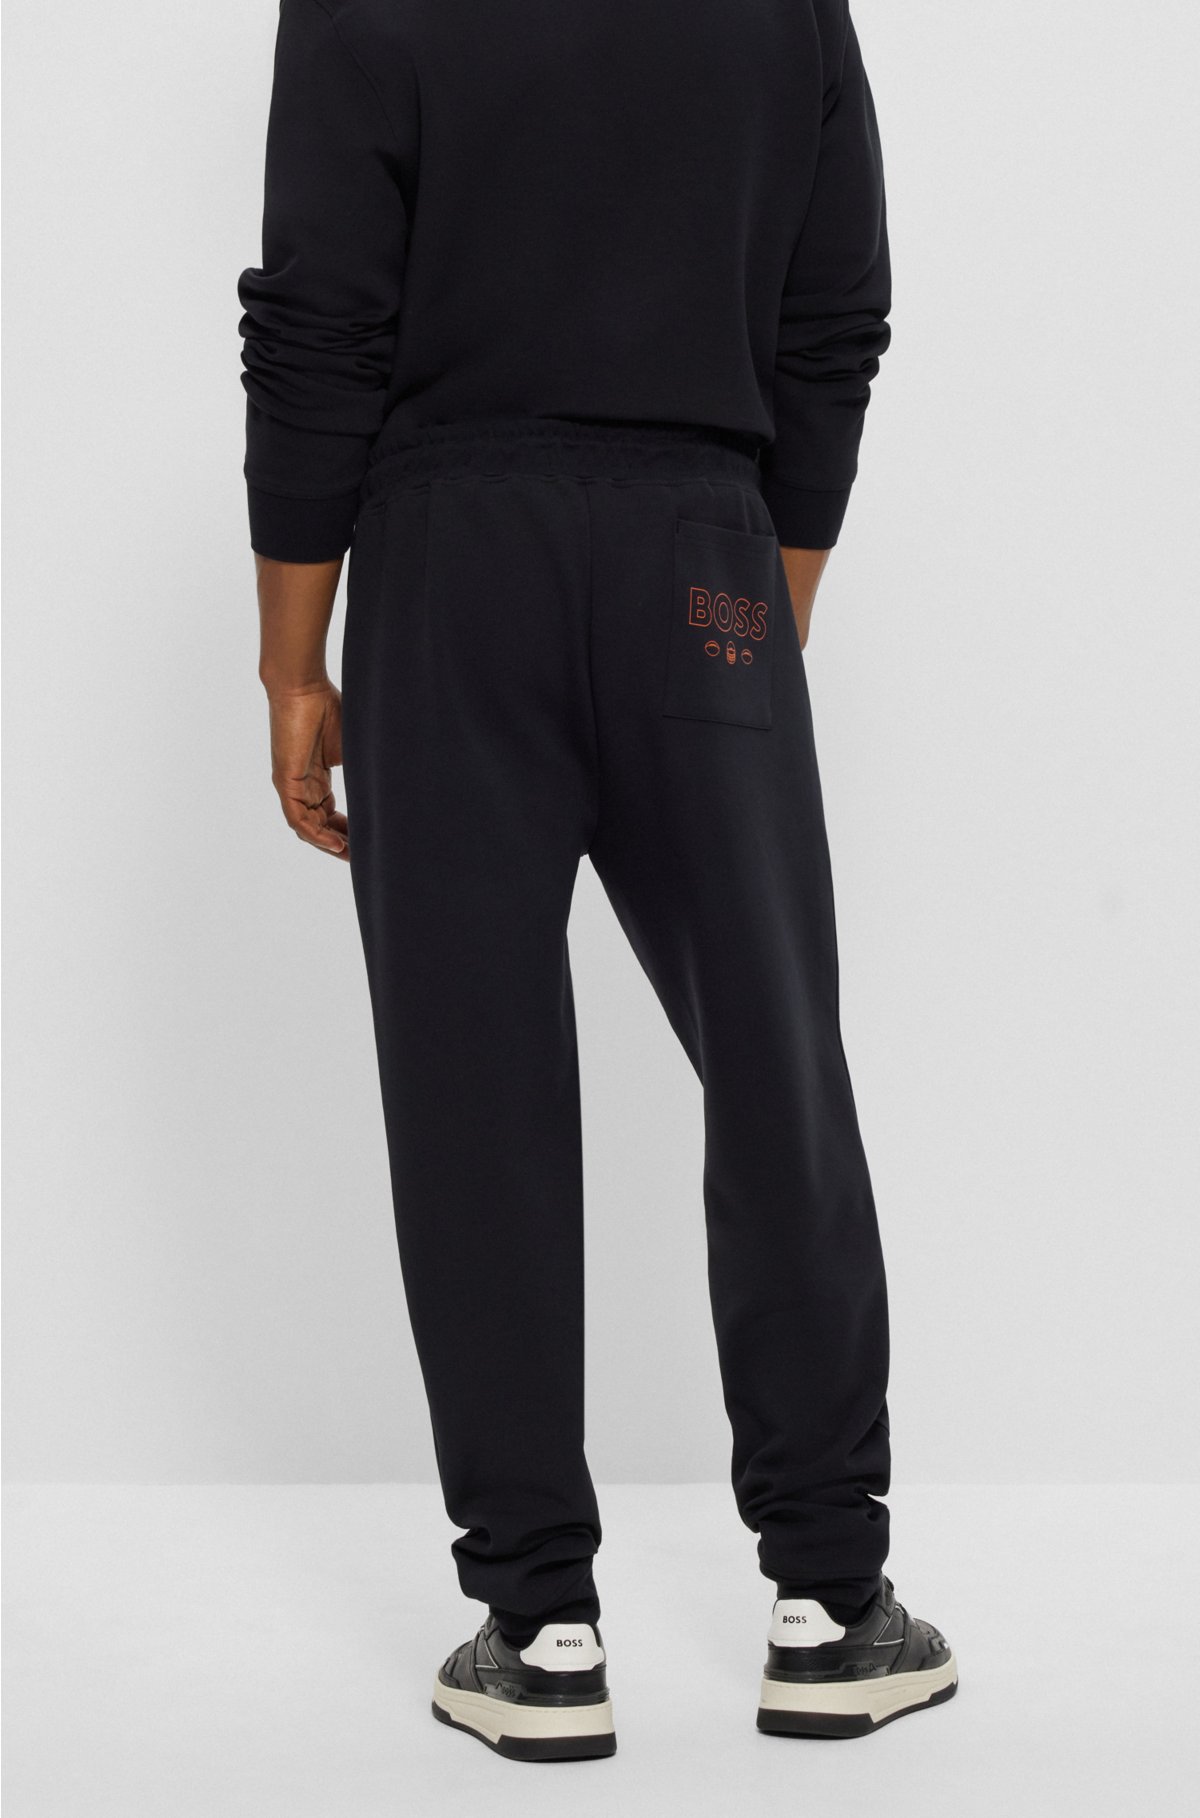 BOSS x NFL cotton-blend tracksuit bottoms with collaborative branding, Bengals